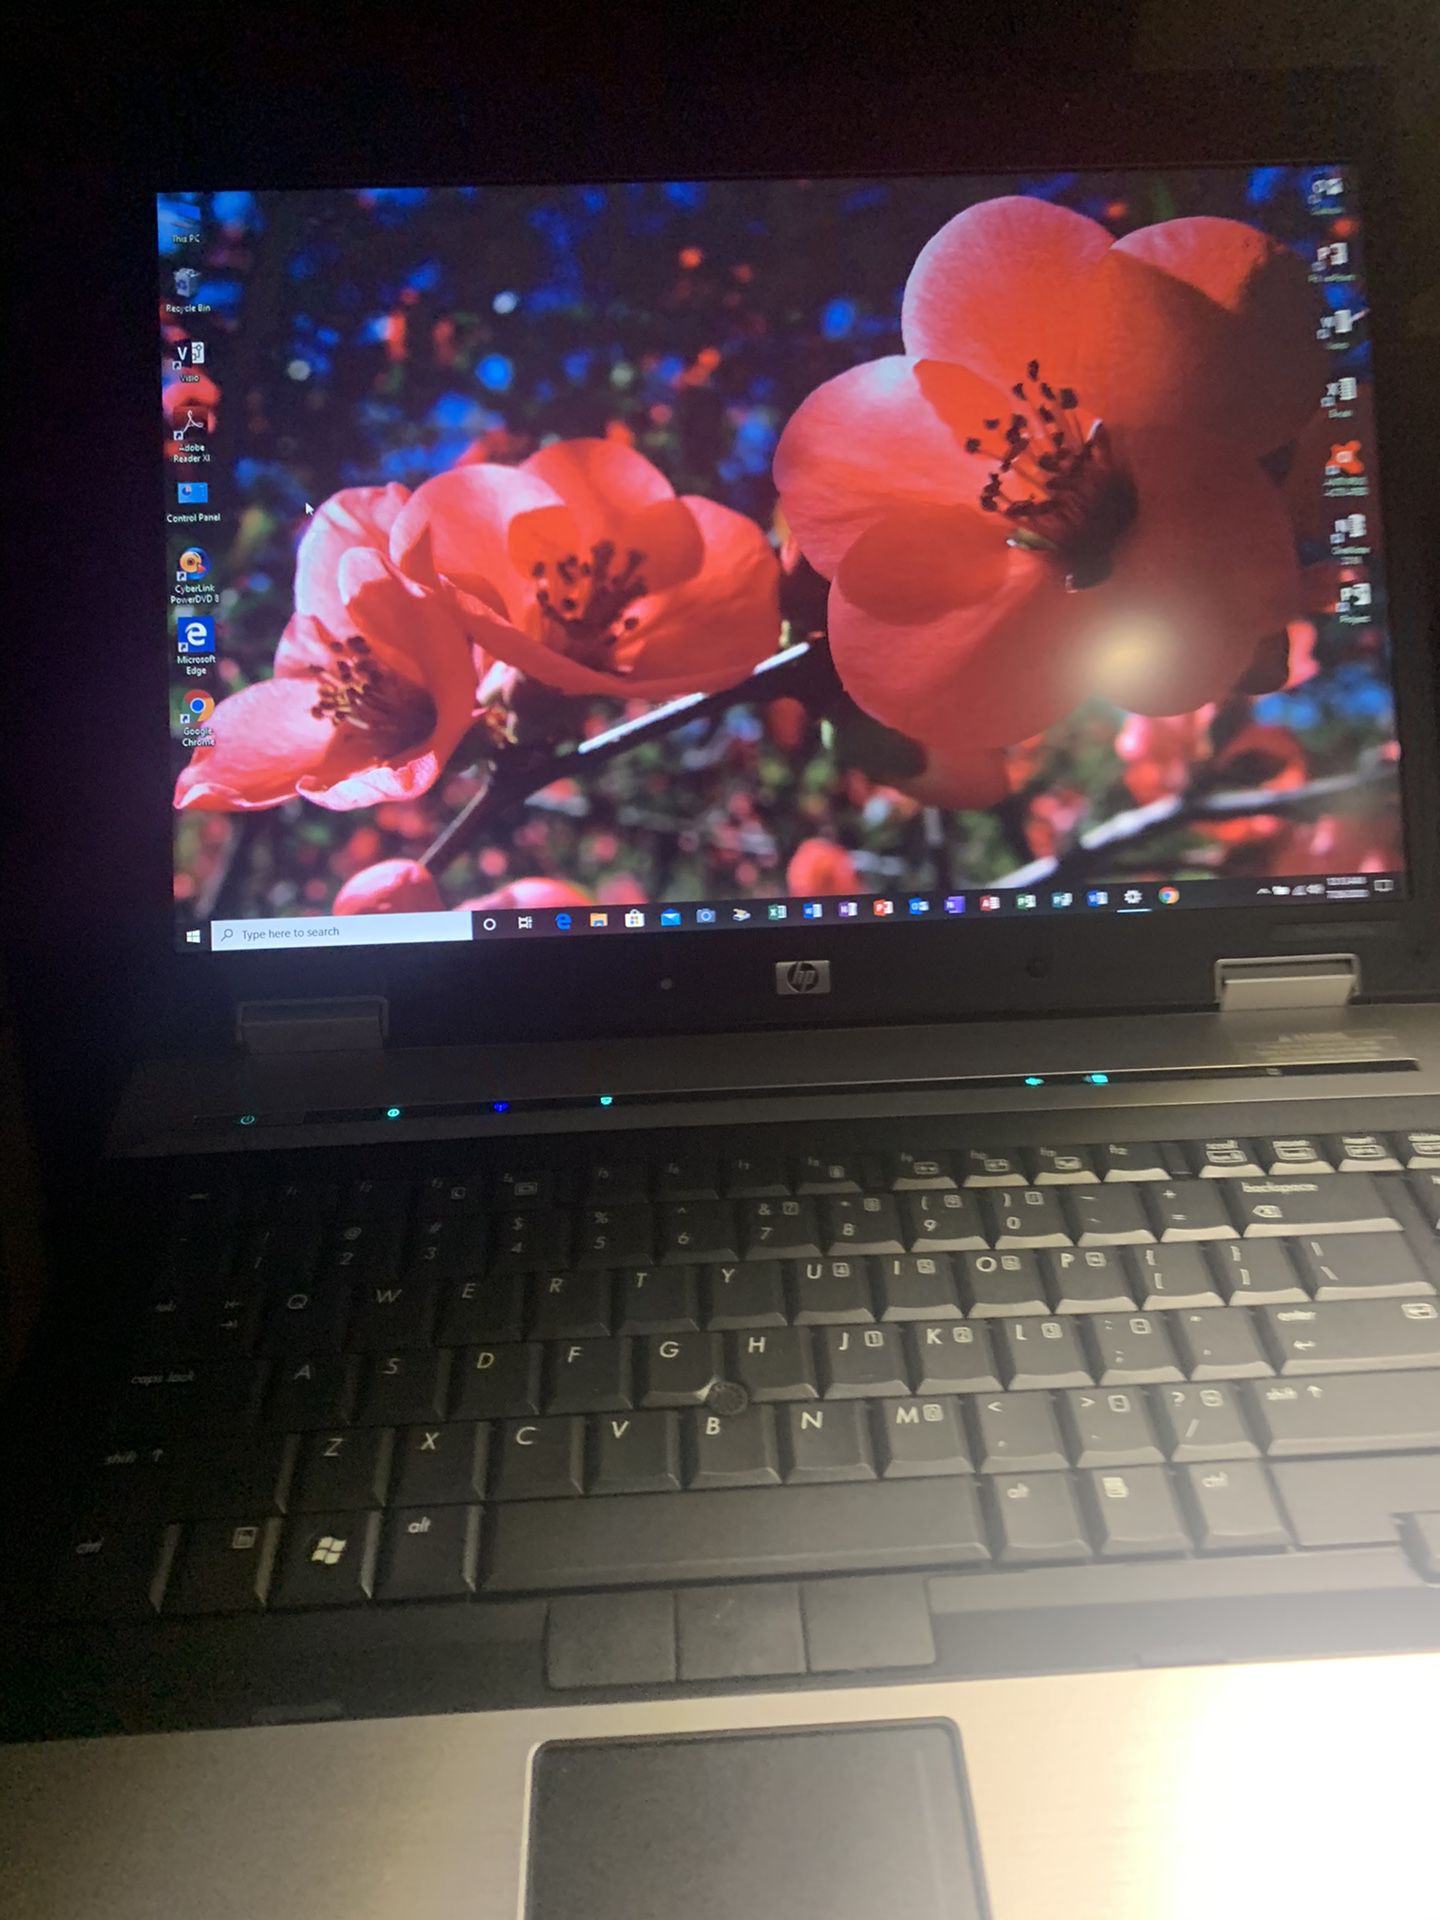 HP ELITEBOOK ...model #8530W...$$$135.00-$$$.....135GB SSD....4.0 RAM ....SUPER CLEAN...READY FOR CLASSES ON LINE OR HOME NO PASSWORD